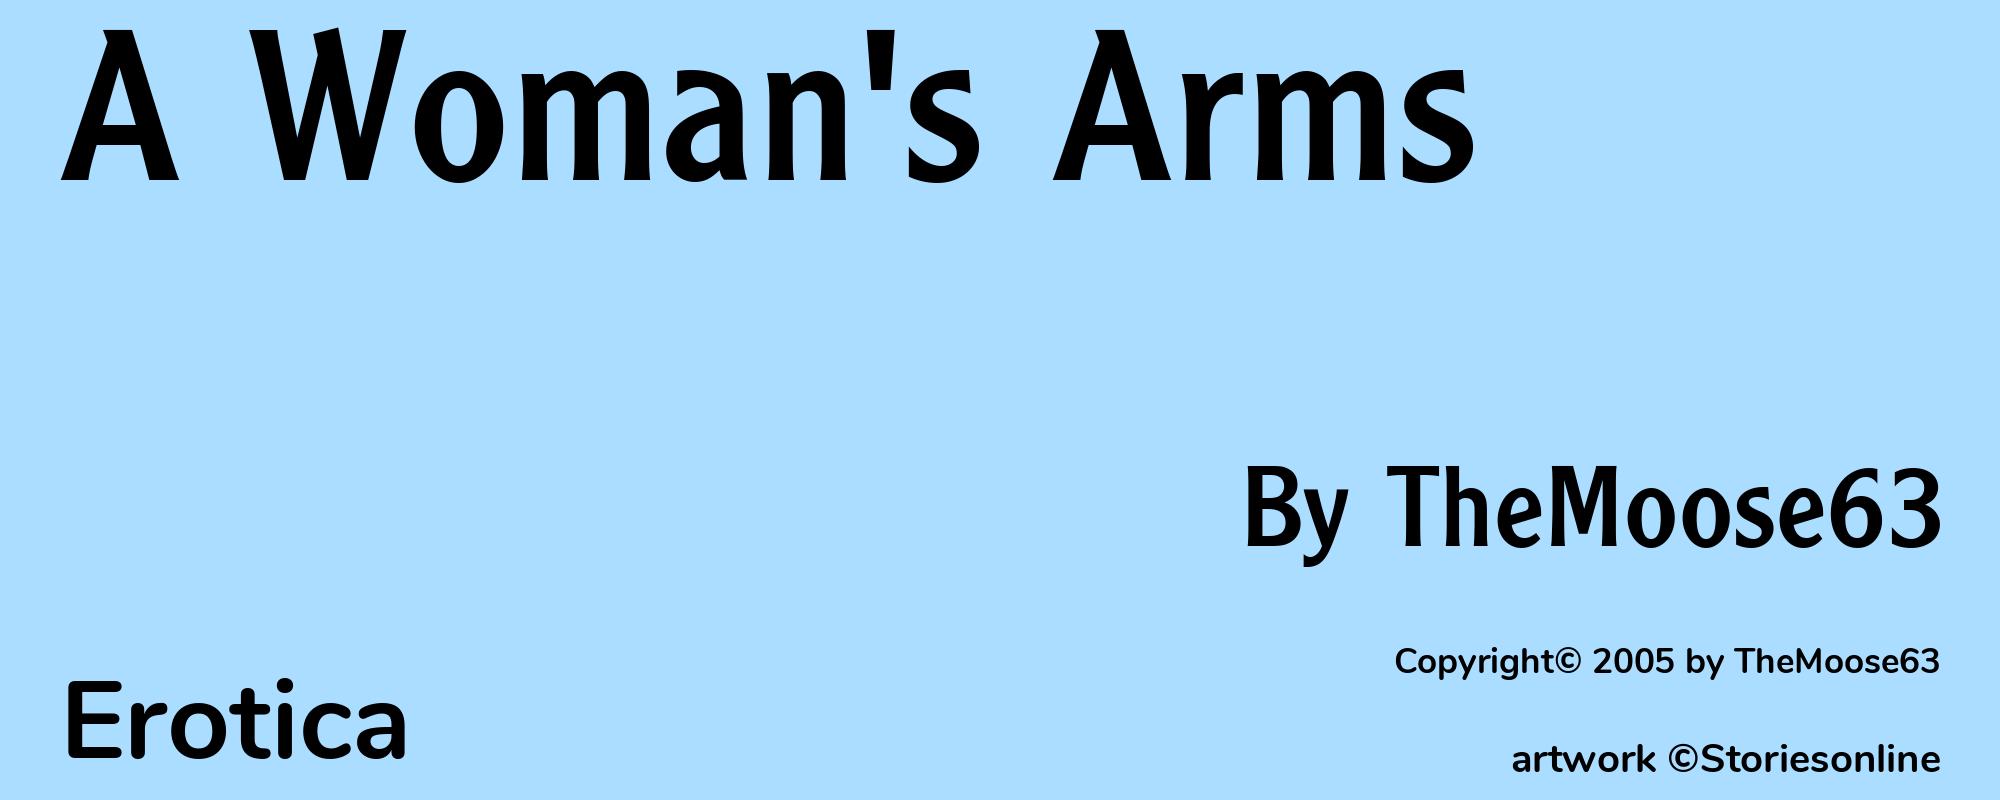 A Woman's Arms - Cover